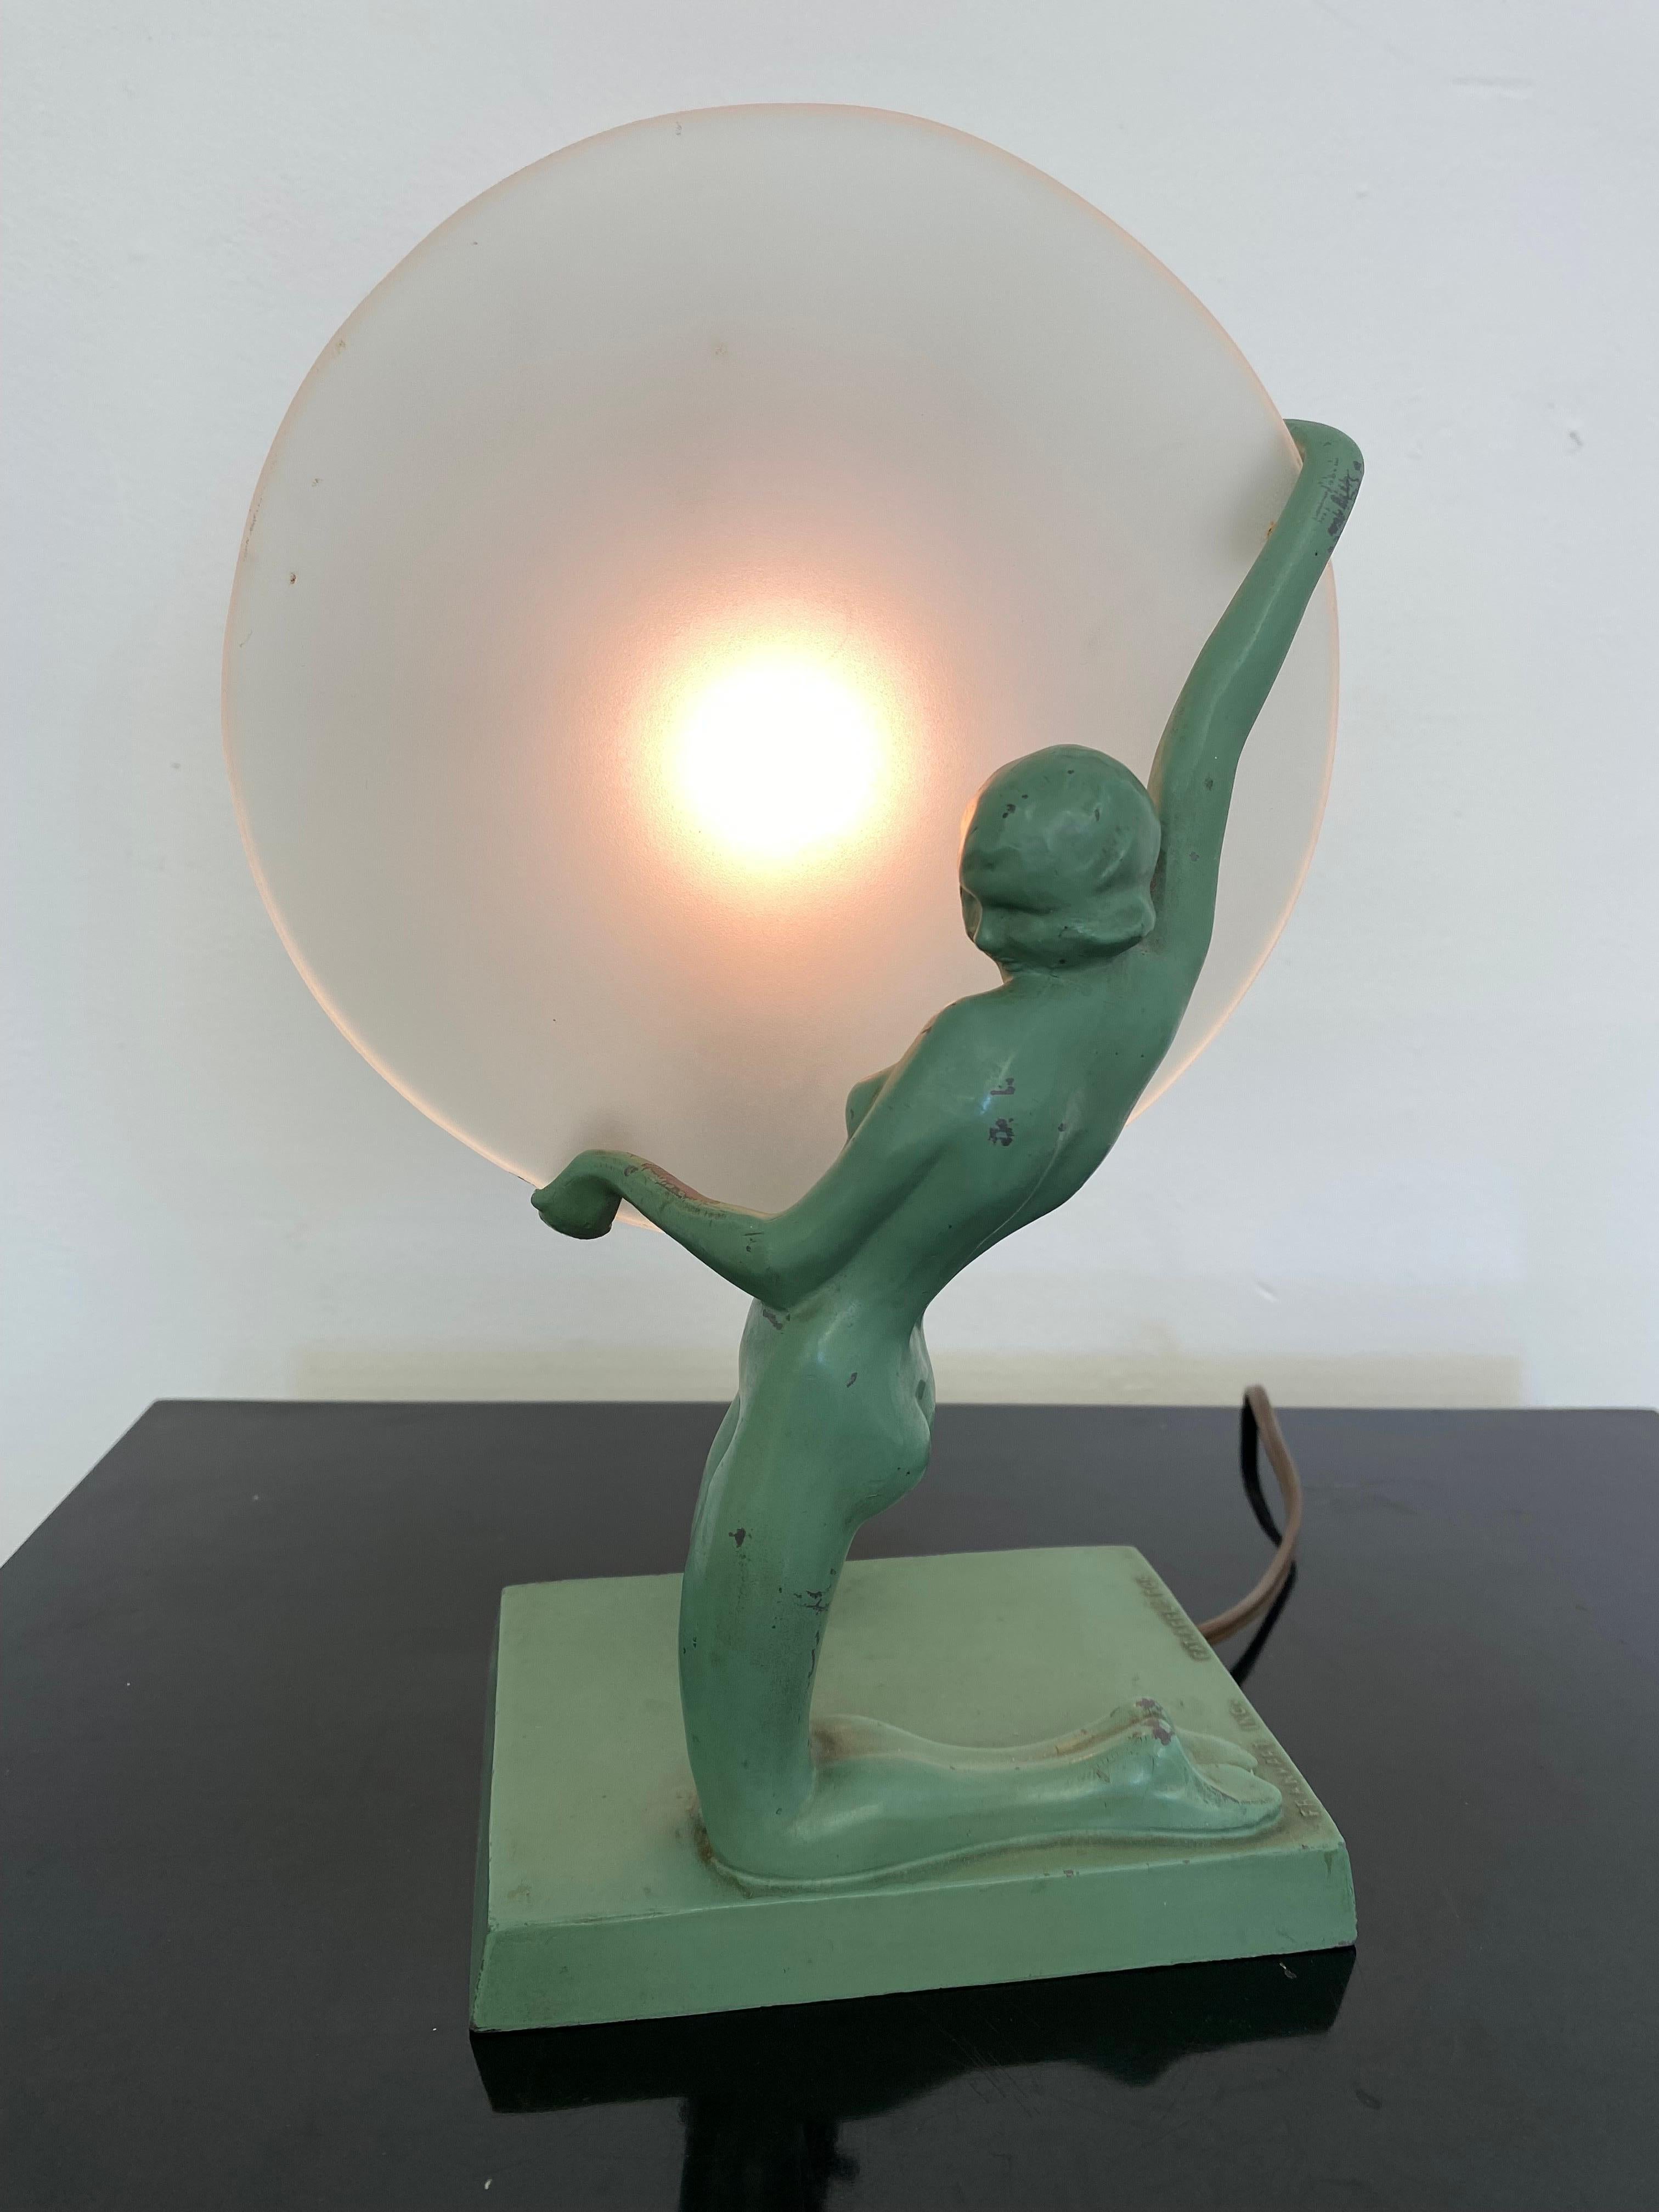 Frankart Kneeling nude lady table lamp, Model L247. Harder to find model! Retains Original Paint! Shows some minor losses to finish. Probably a later replacement Glass Pane. Great looking, signed to bottom edge.